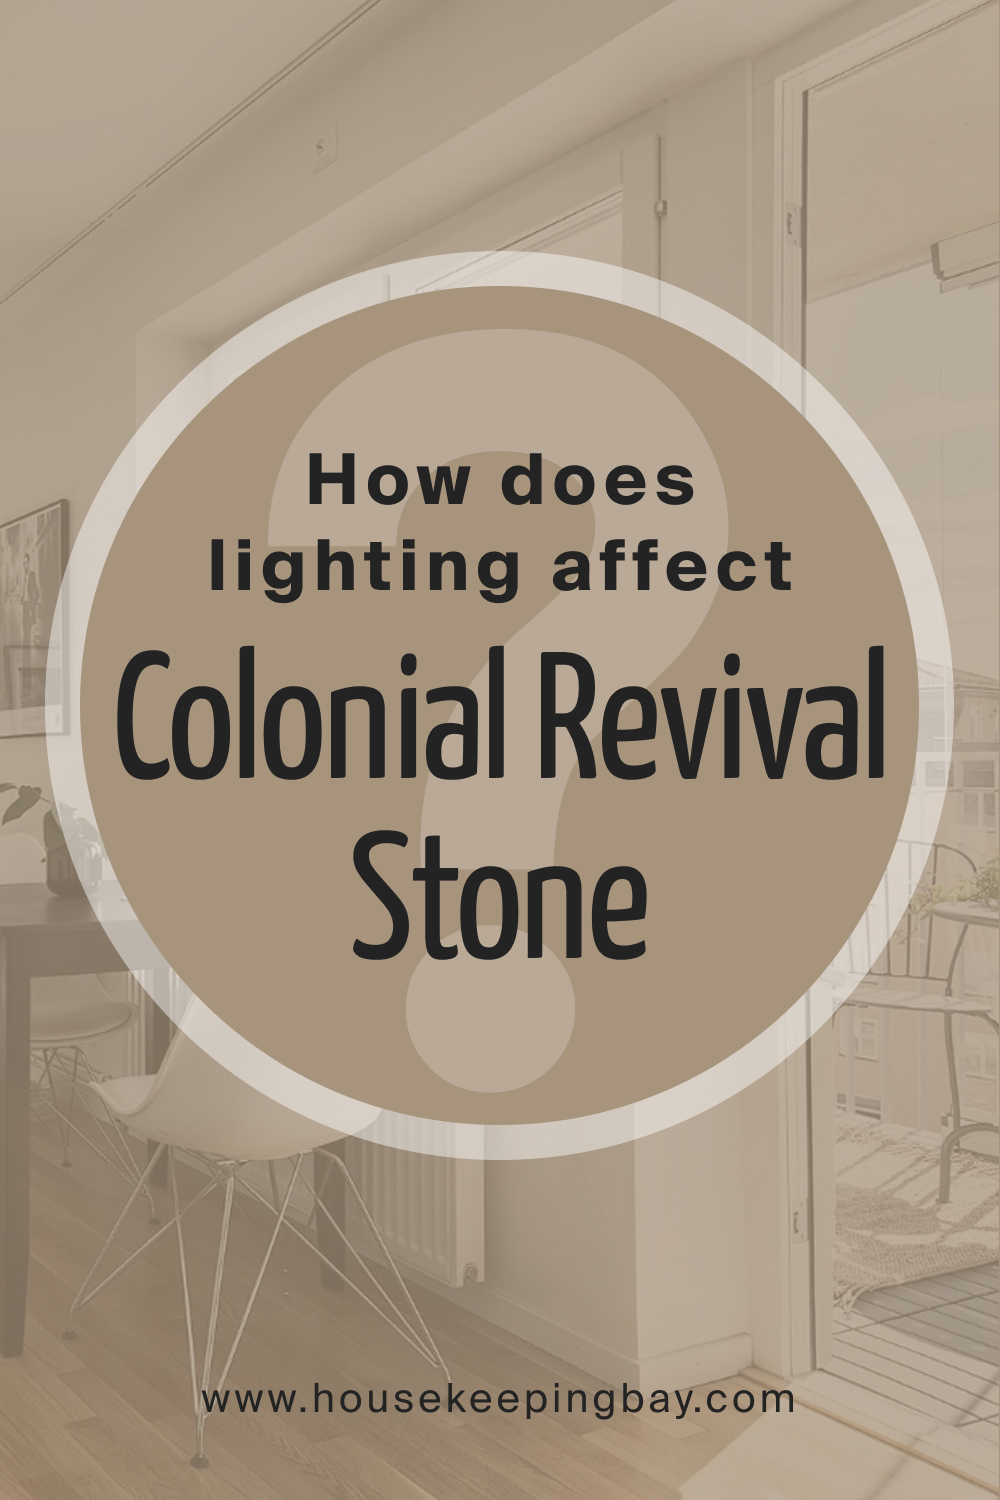 How does lighting affect SW 2827 Colonial Revival Stone